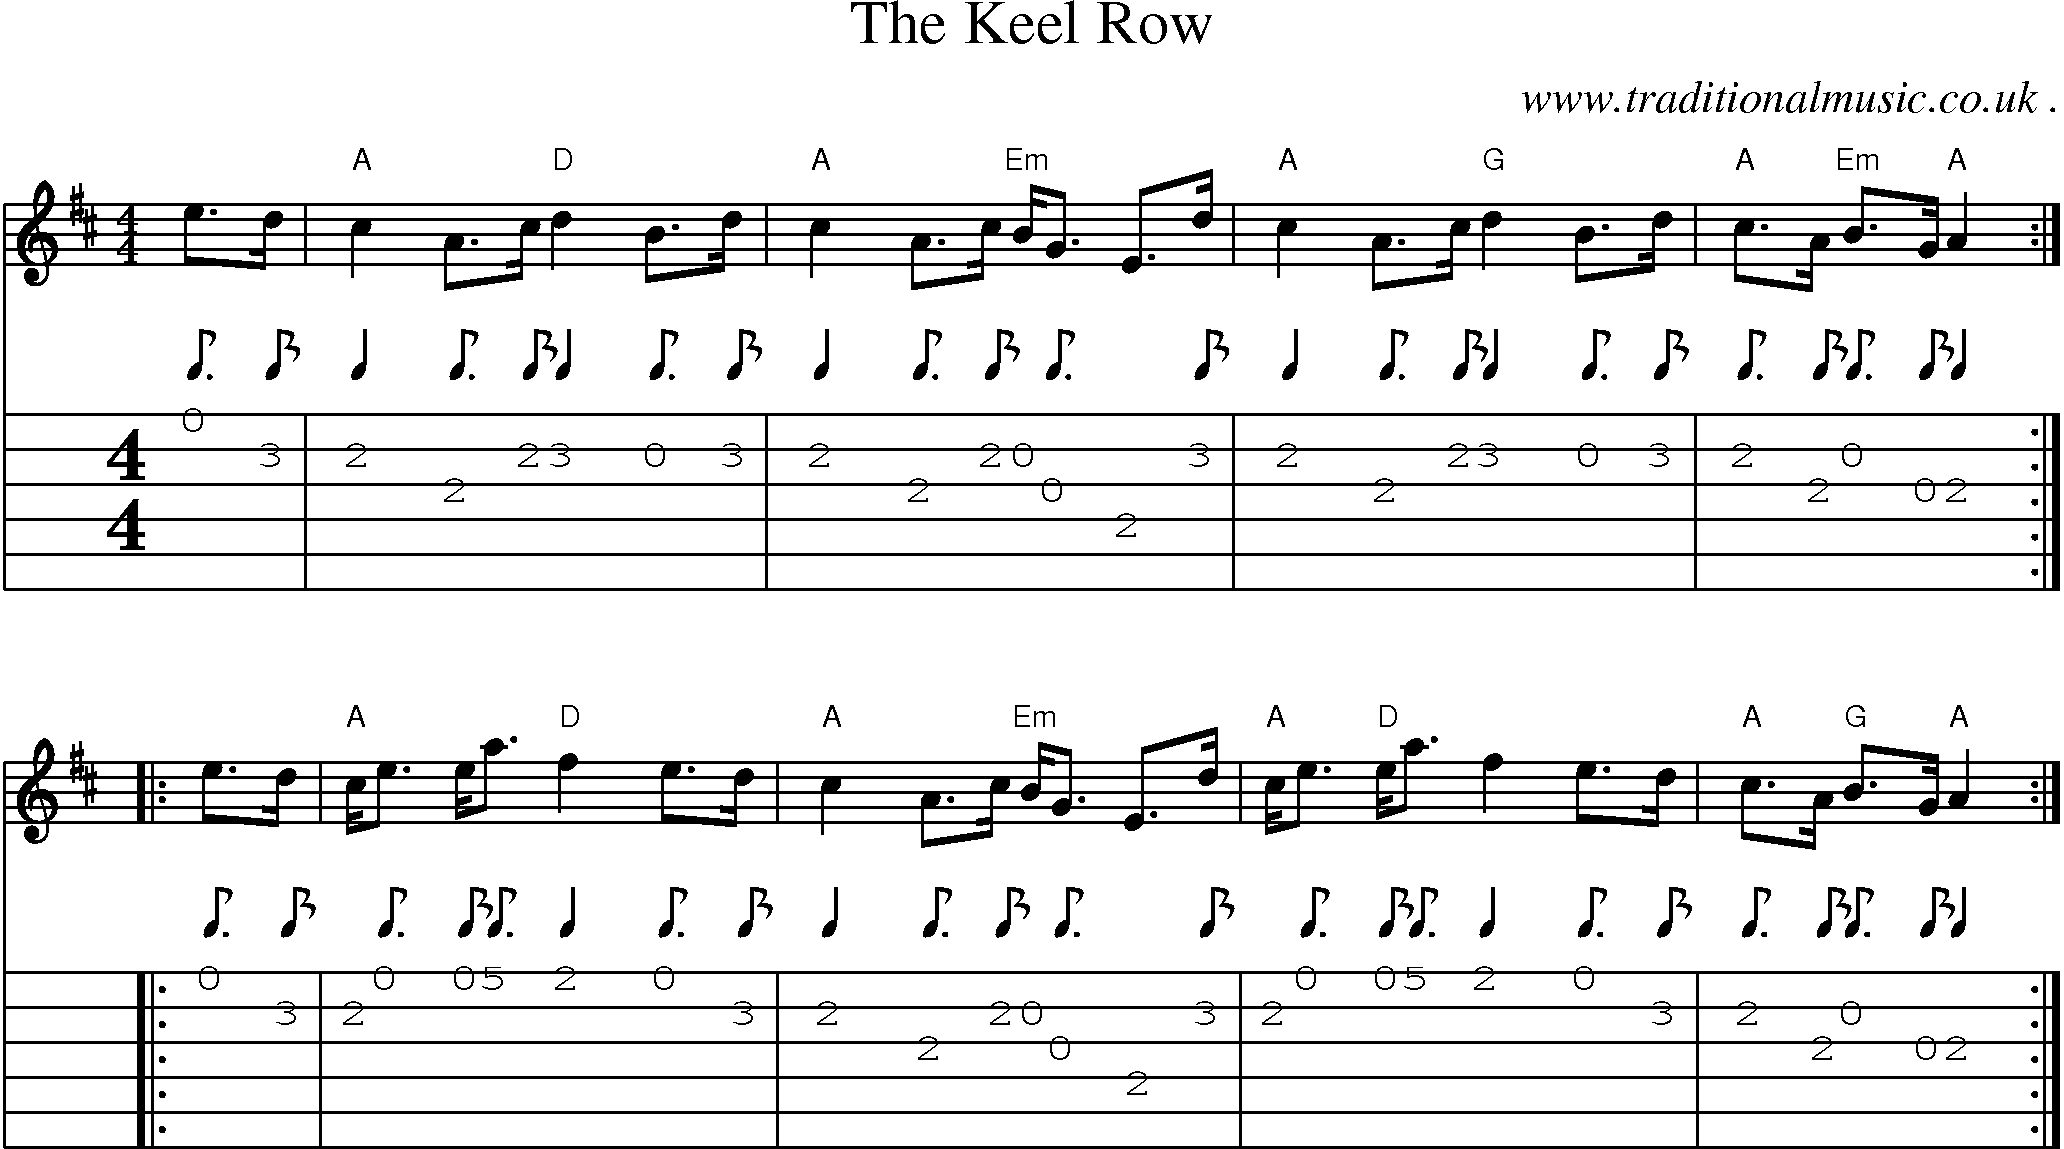 Music Score and Guitar Tabs for The Keel Row